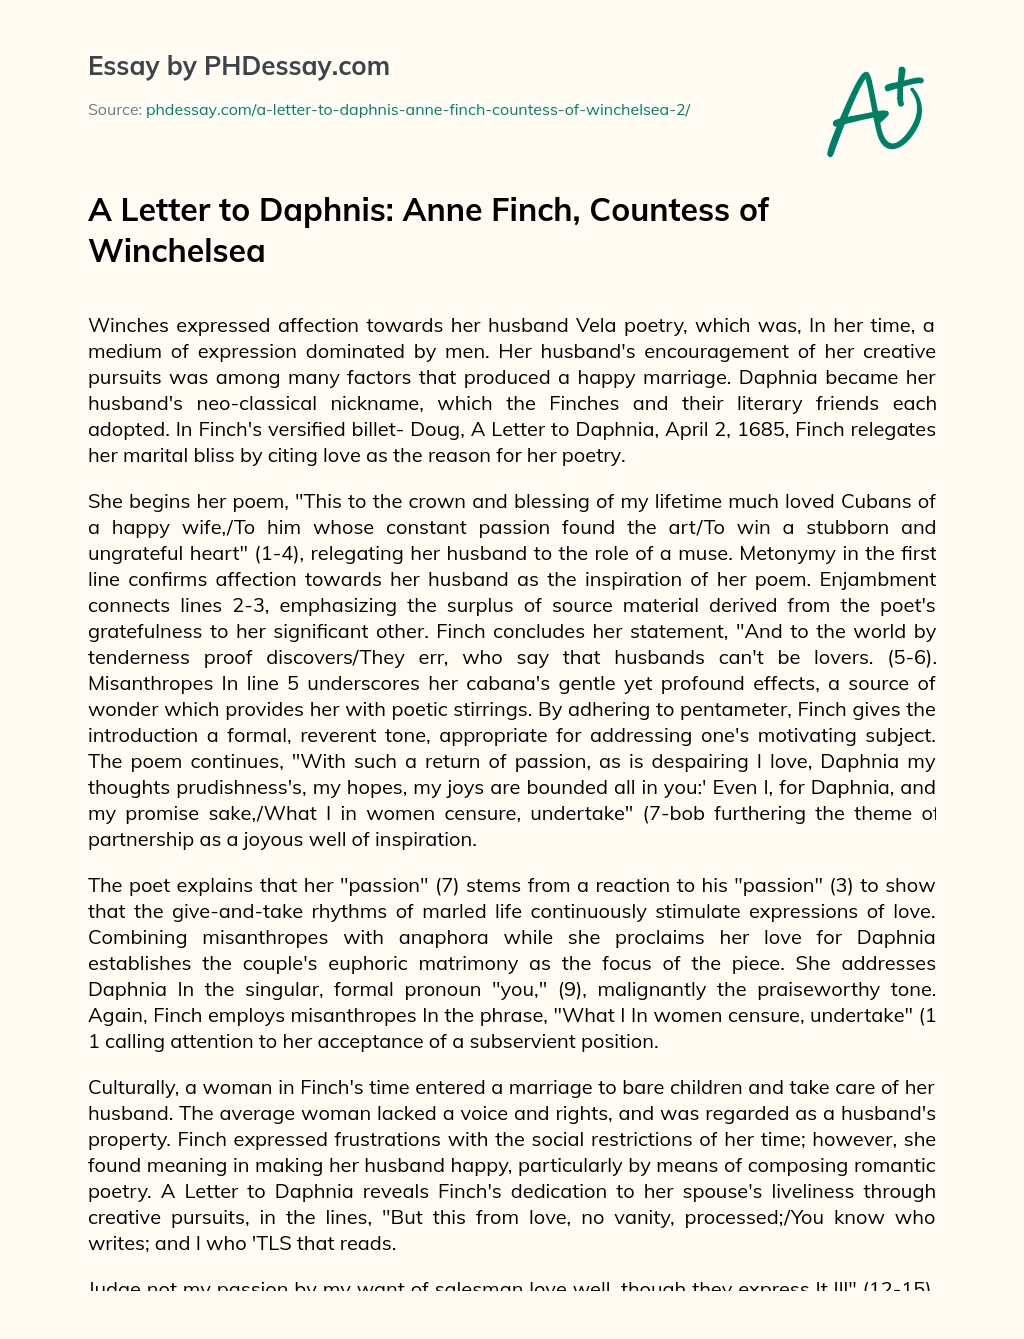 A Letter to Daphnis: Anne Finch, Countess of Winchelsea essay